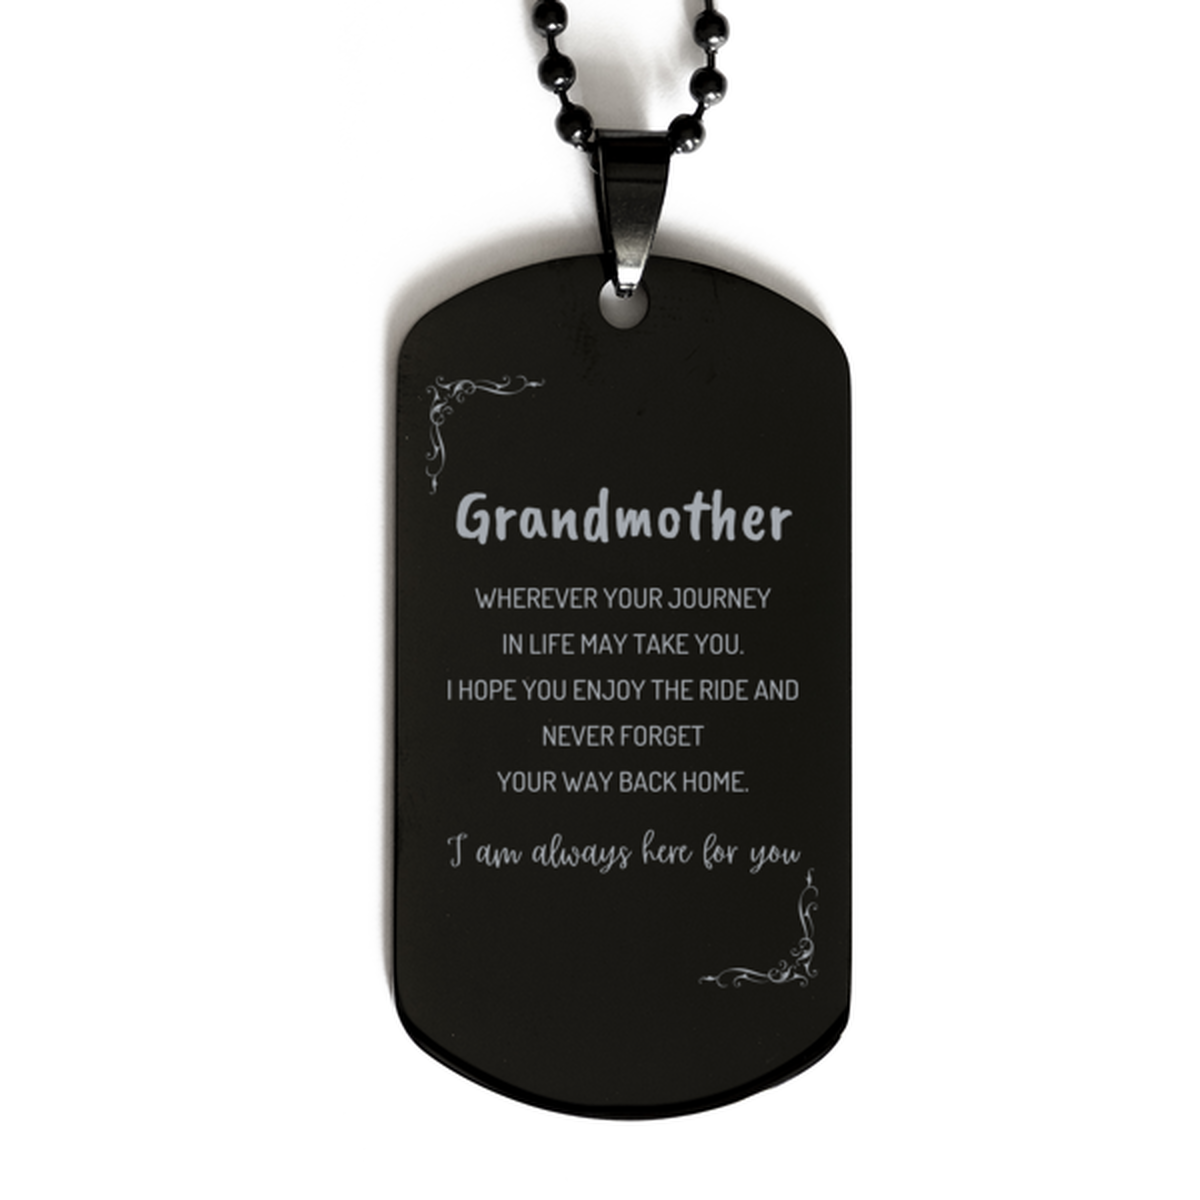 Grandmother wherever your journey in life may take you, I am always here for you Grandmother Black Dog Tag, Awesome Christmas Gifts For Grandmother, Grandmother Birthday Gifts for Men Women Family Loved One